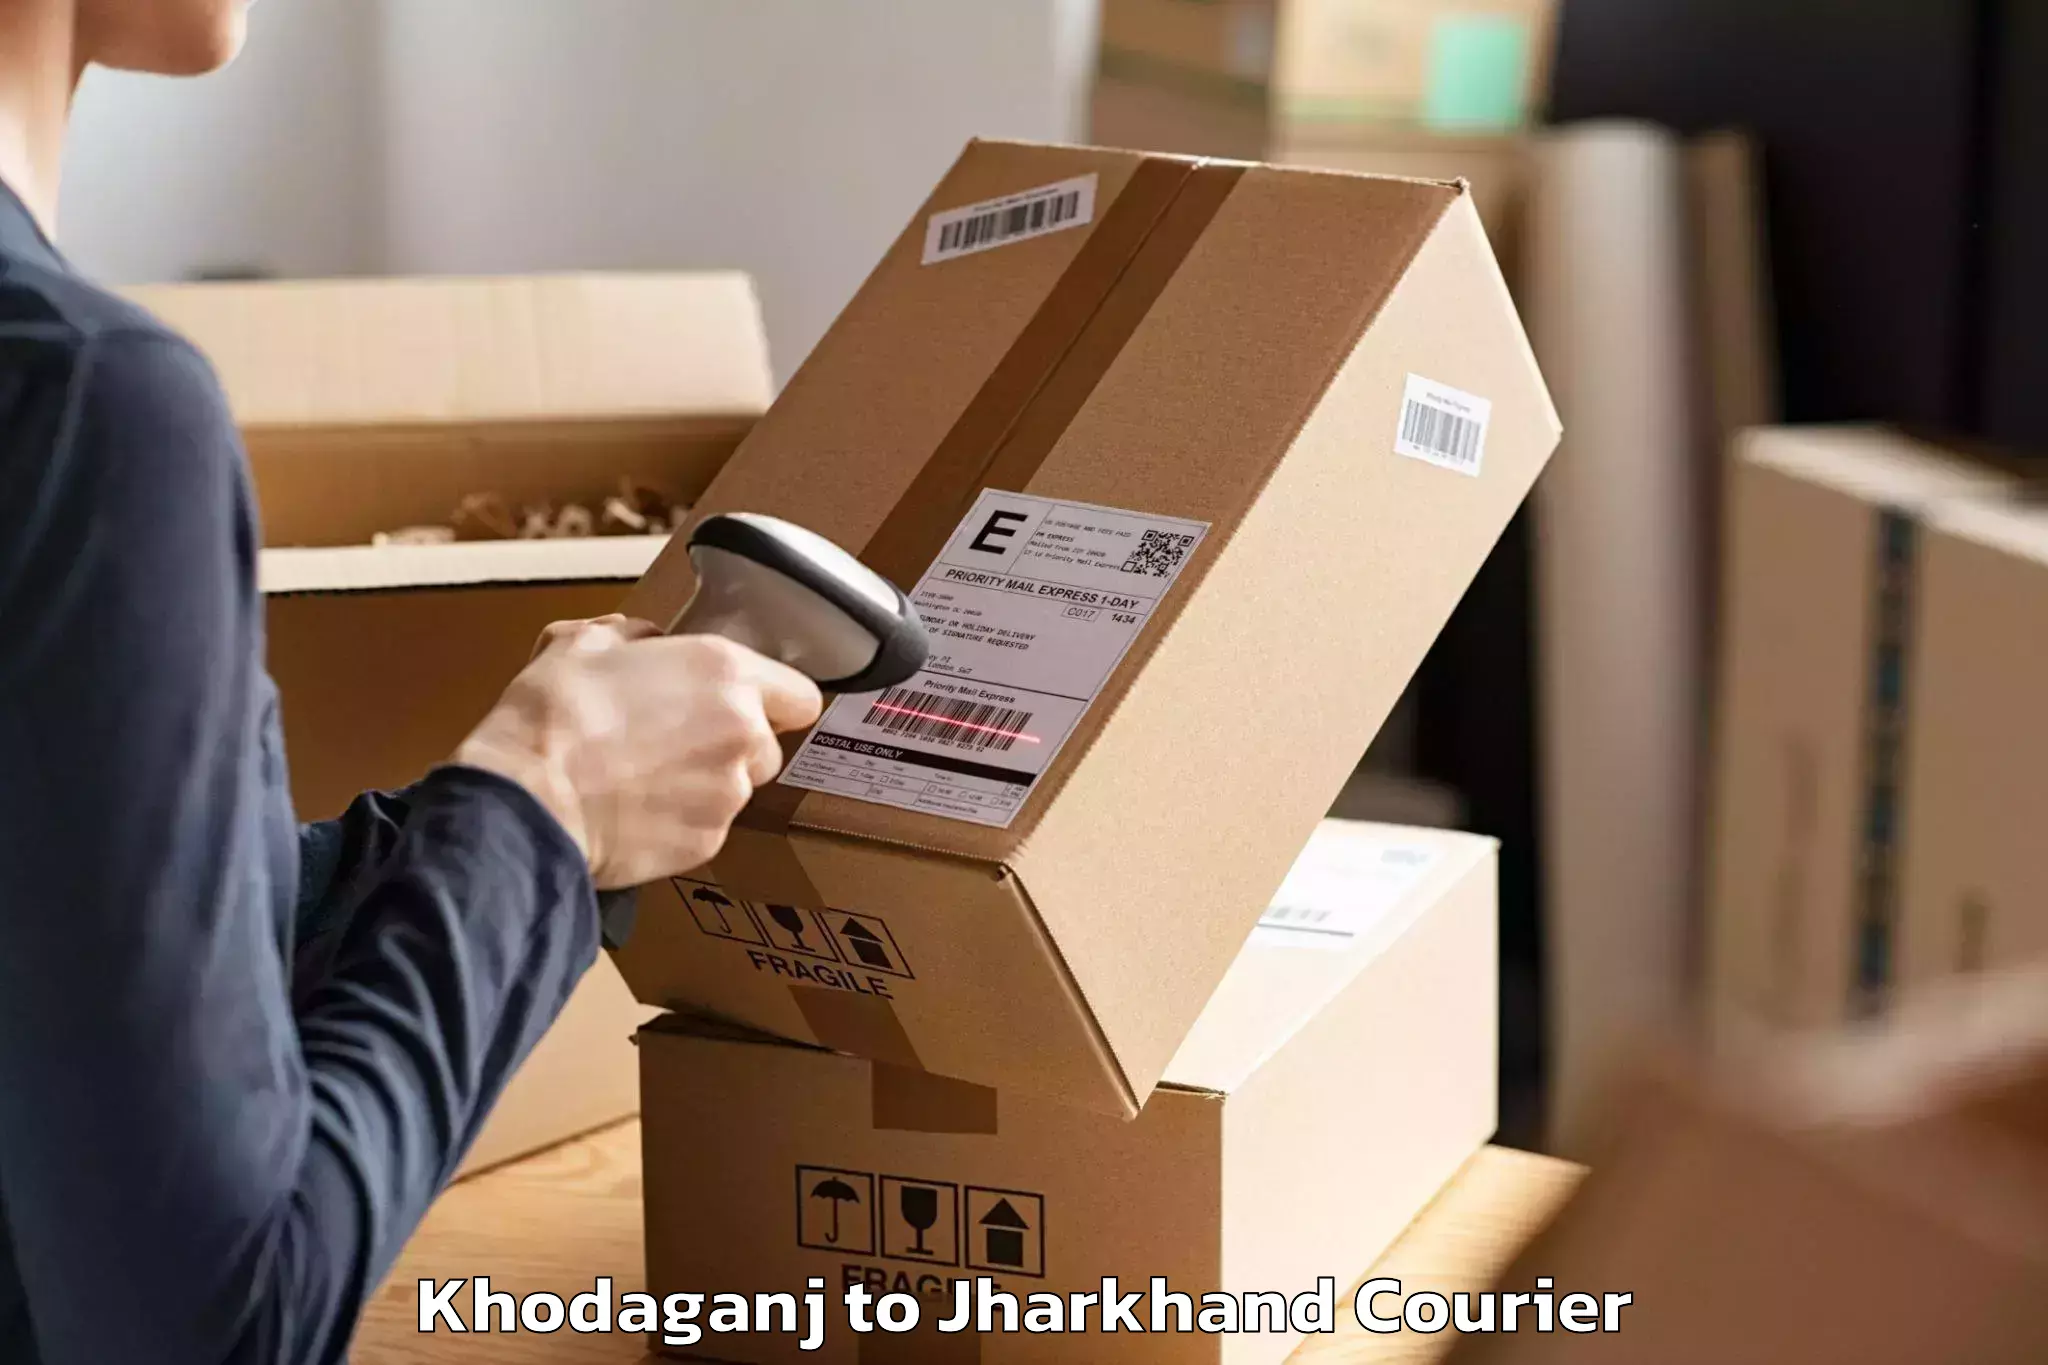 Trusted relocation services Khodaganj to Dhanbad